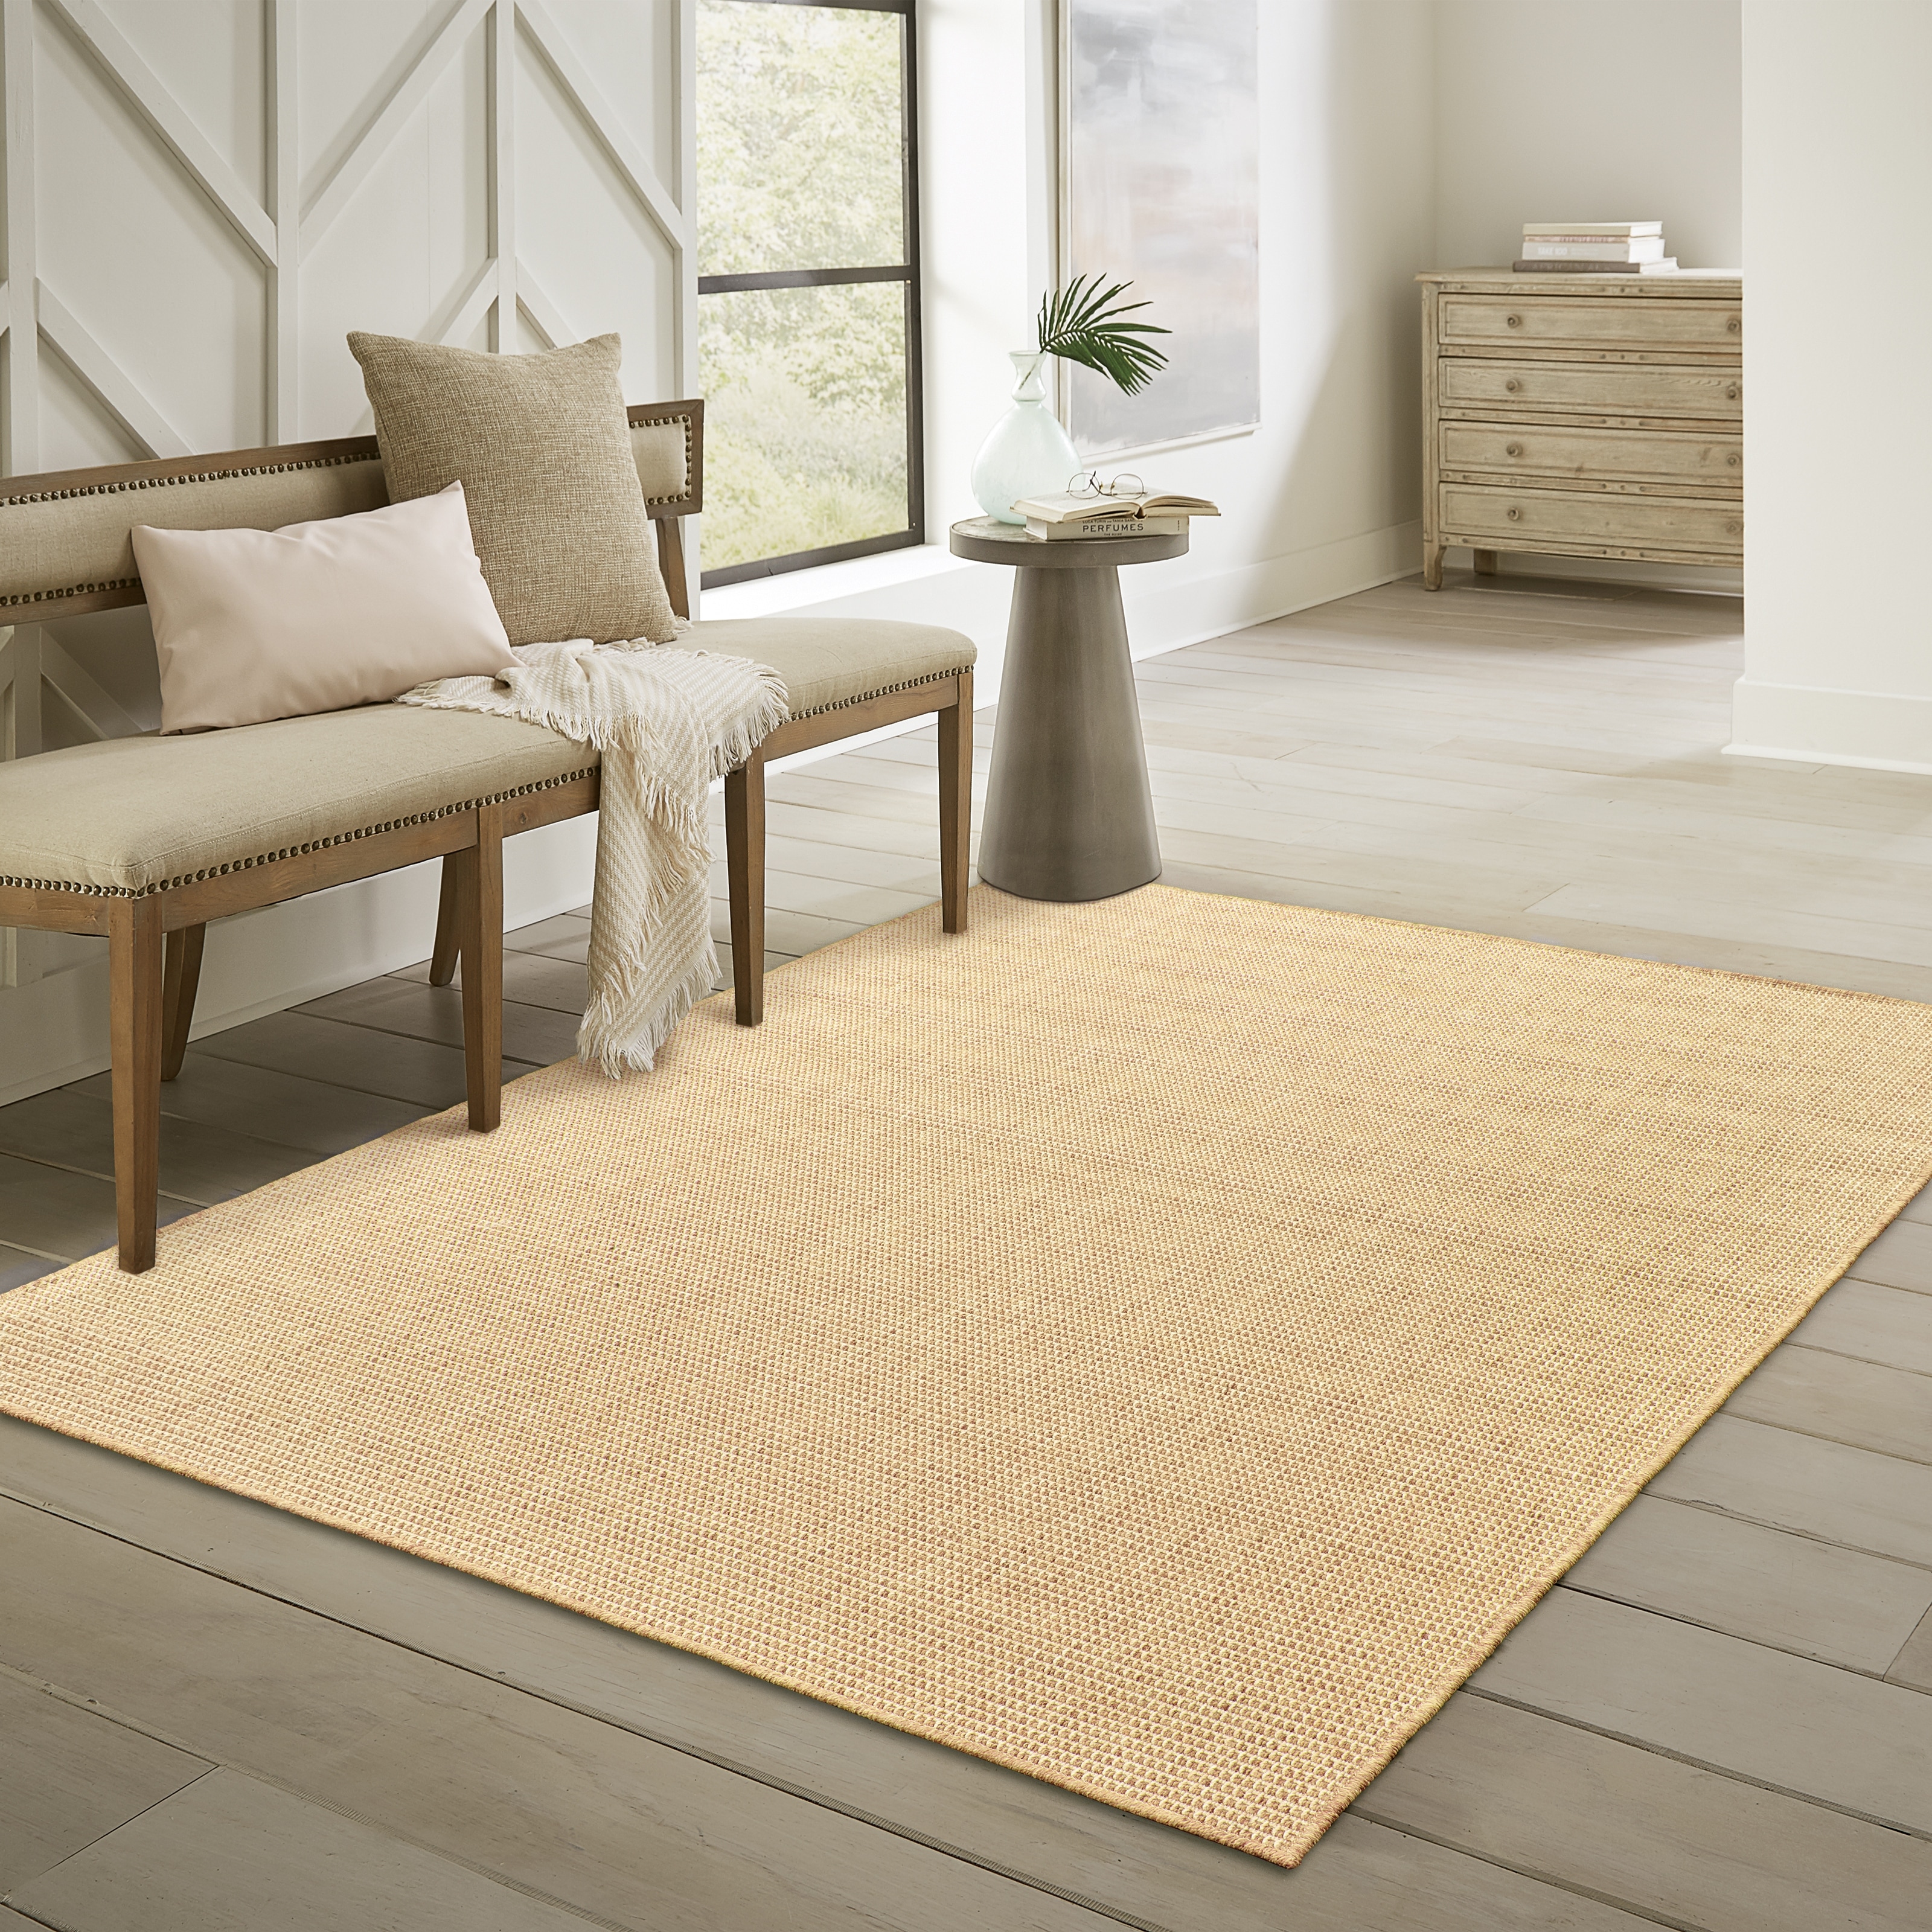 https://ak1.ostkcdn.com/images/products/is/images/direct/5daa64c8a967655bb2acd39f2f42103fc73ccb45/Carbon-Loft-Cummins-Sand-Indoor-Outdoor-Area-Rug.jpg